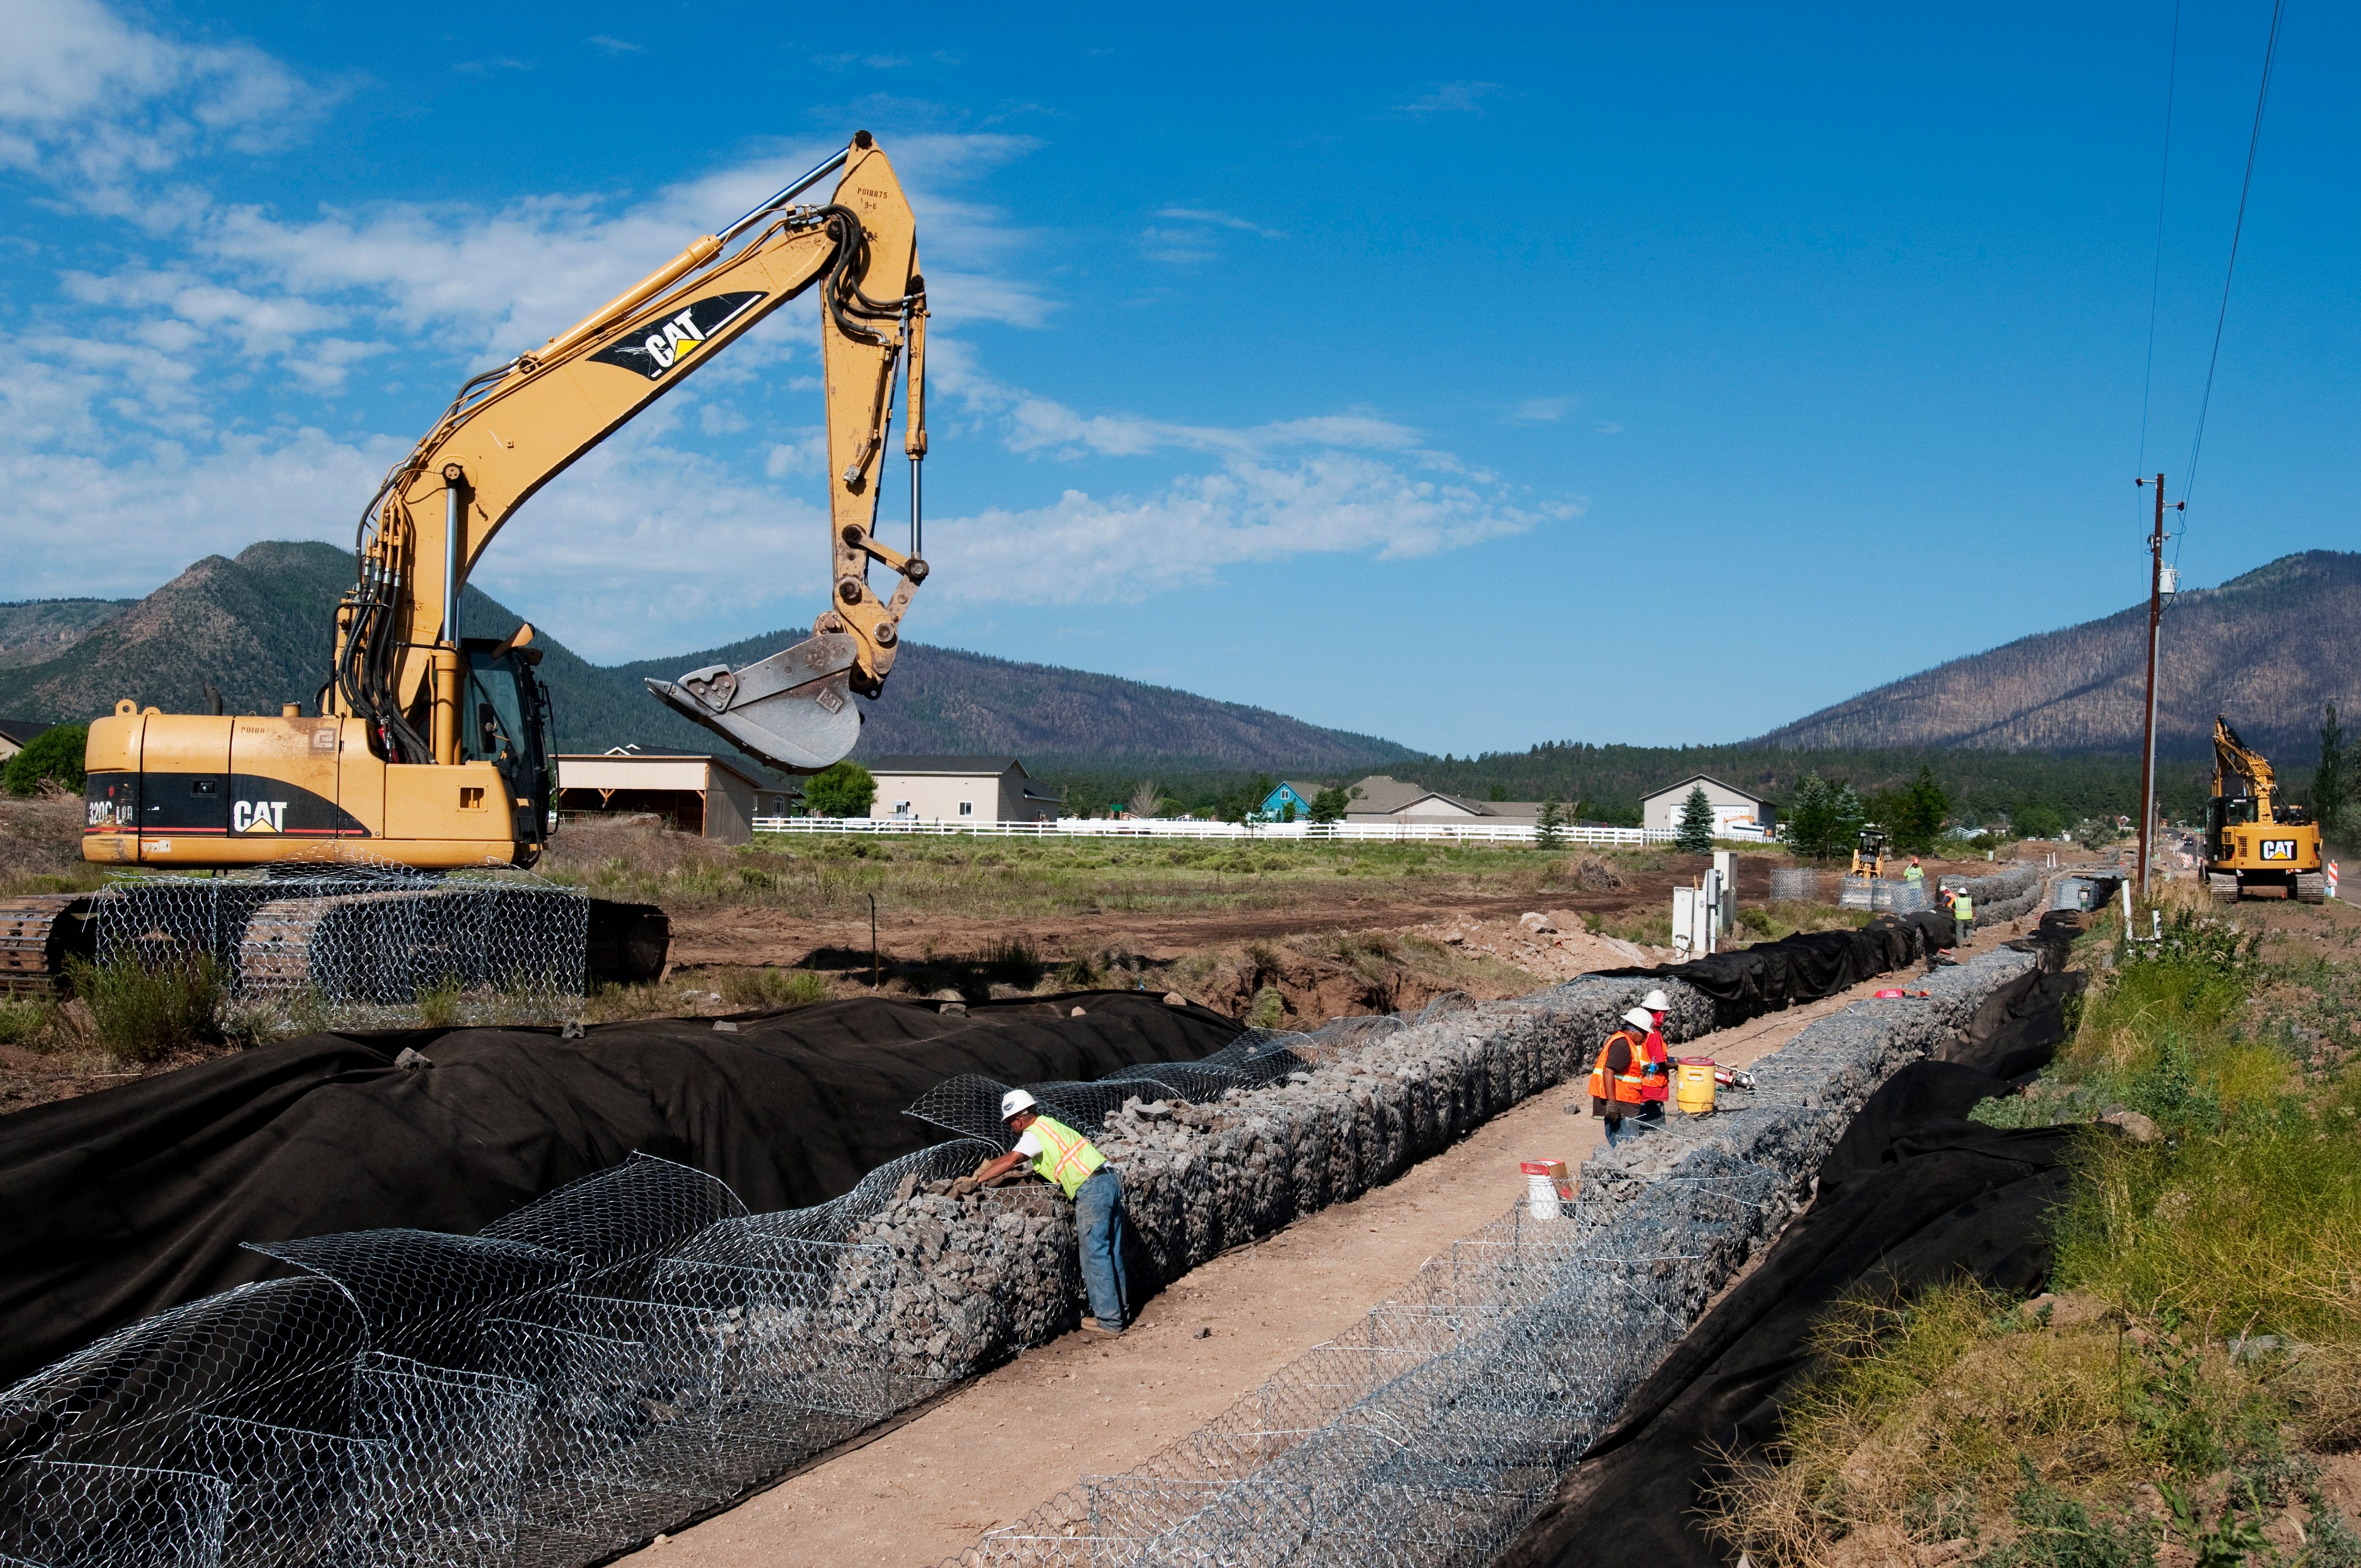 A water diversion canal was reinforced in case of future flooding one year after the Schultz Fire of 2010.